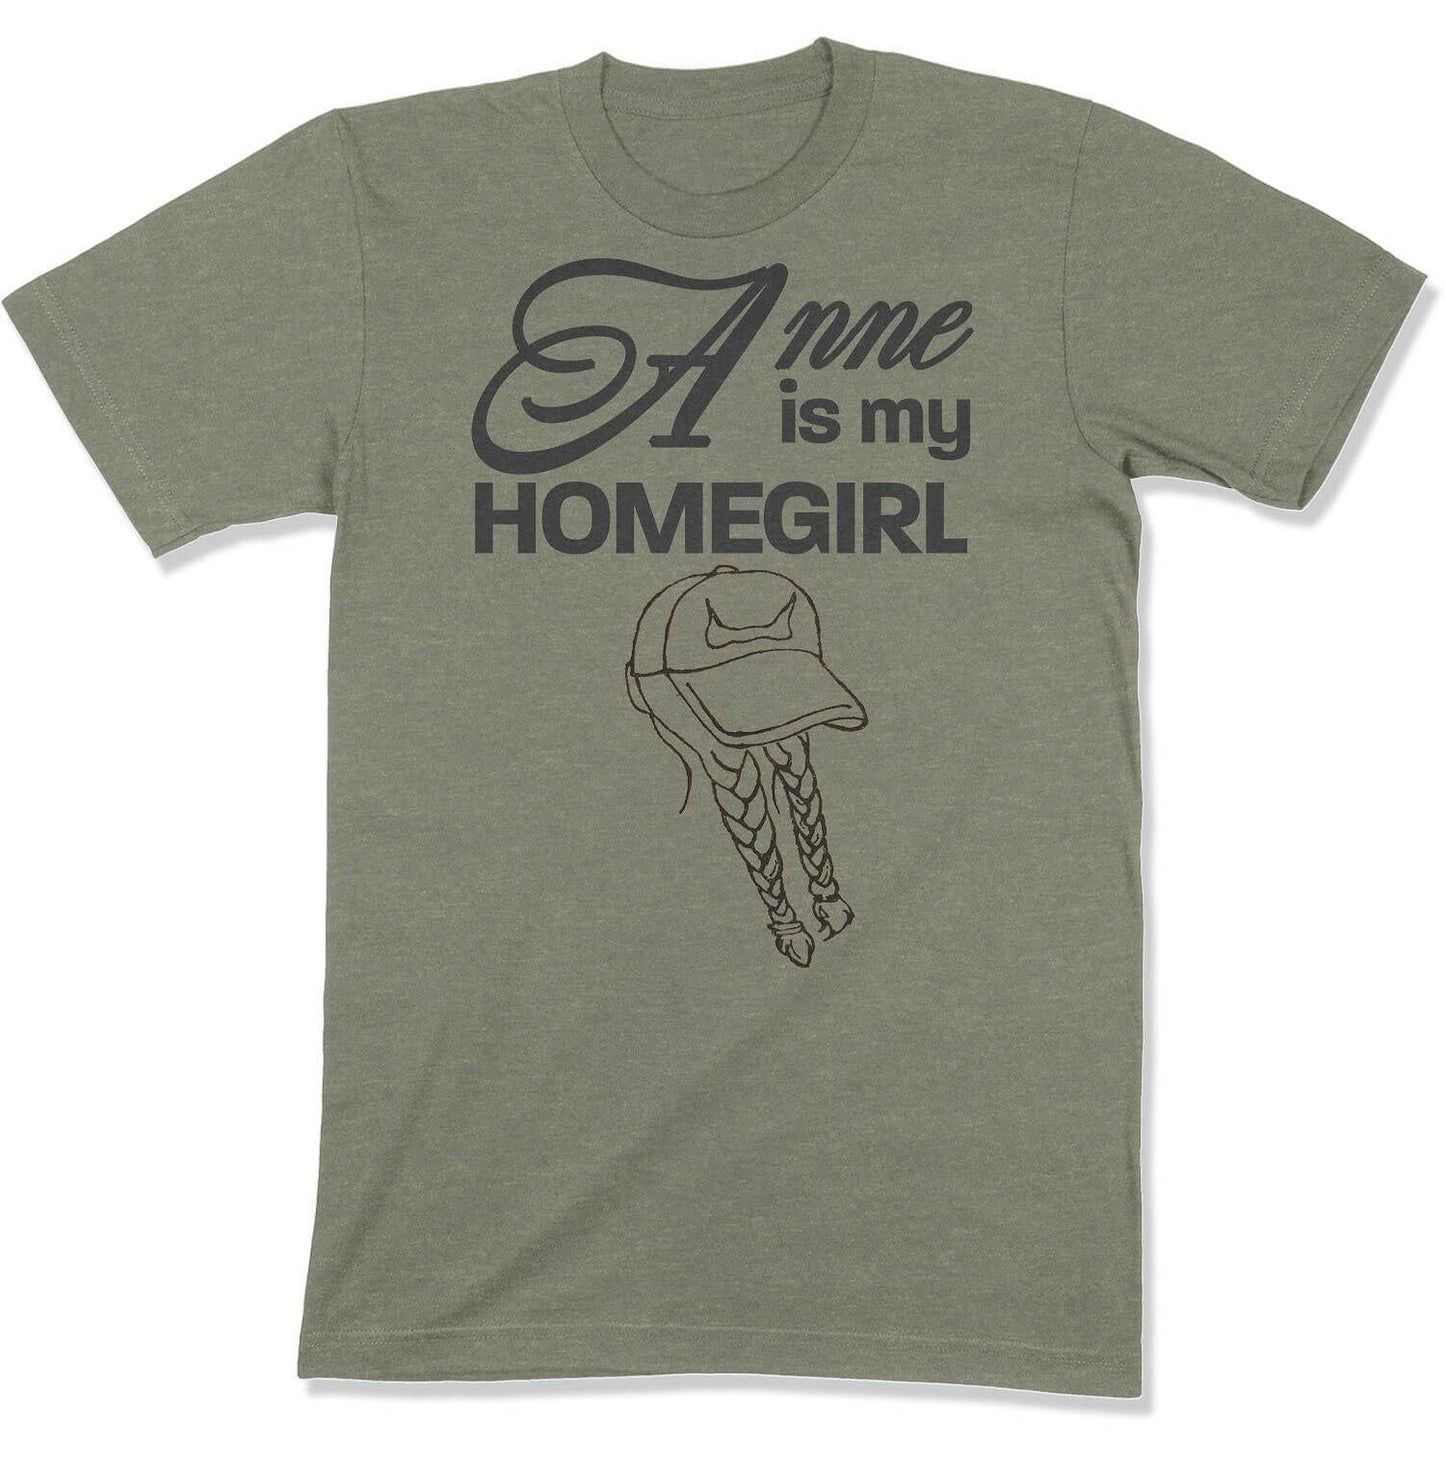 Anne is My Homegirl Unisex T-shirt in Color: Athletic Heather, Burnt Orange, Heather Columbia Blue, Heather Mint, Heather Peach, Heather Prism Mint, Heather Yellow Gold, Kelly, Mauve, Ocean Blue, Pink, White - East Coast AF Apparel